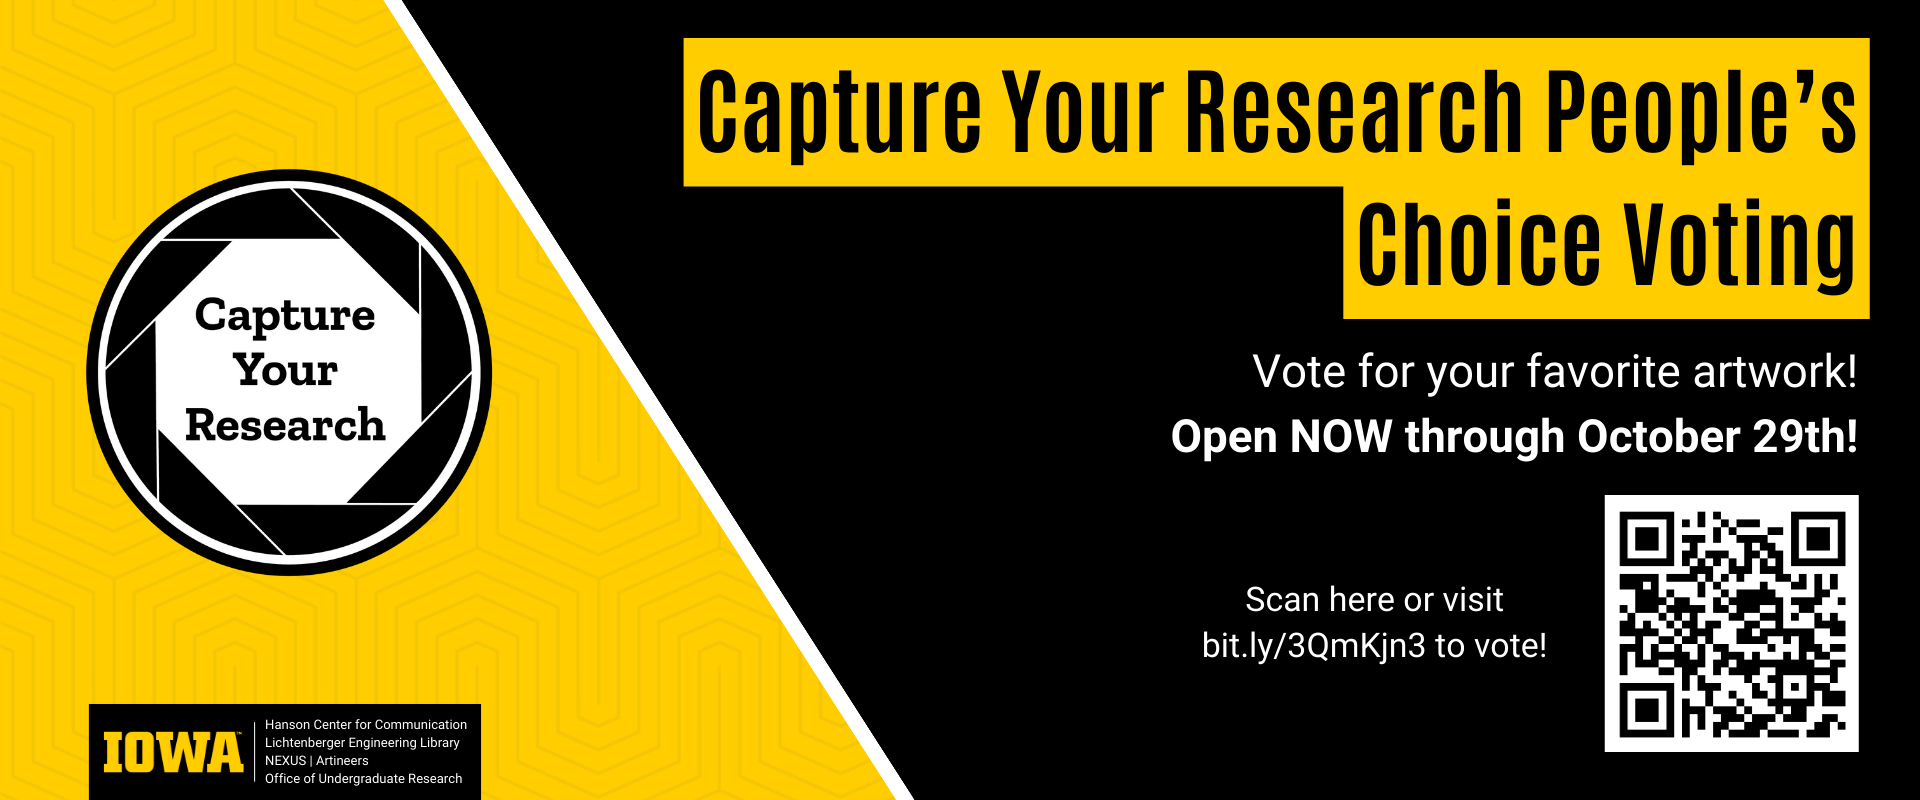 Capture Your Research People's Choice Voting